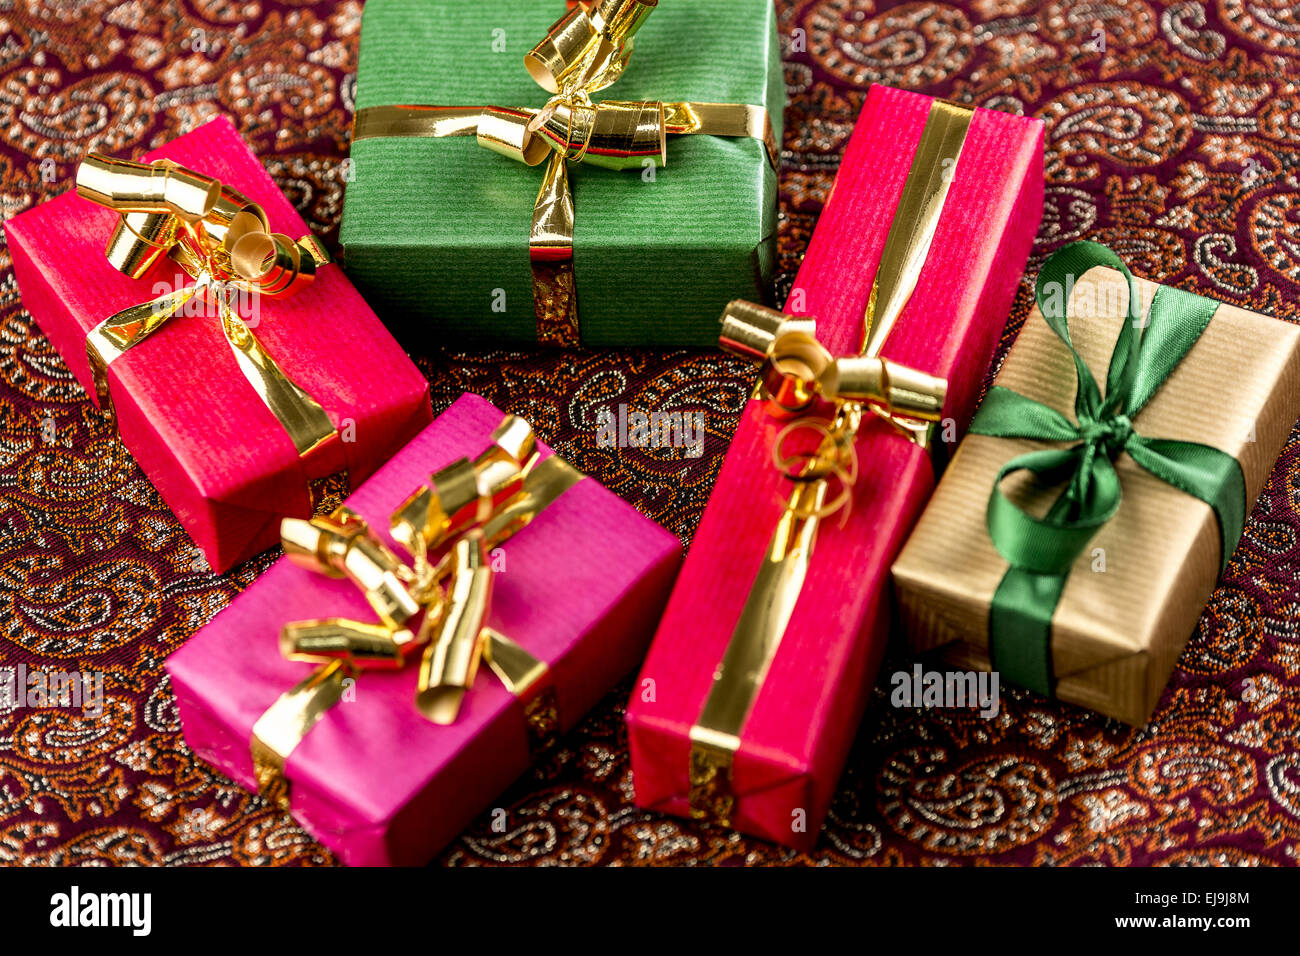 Five Single-Colored Gifts Stock Photo